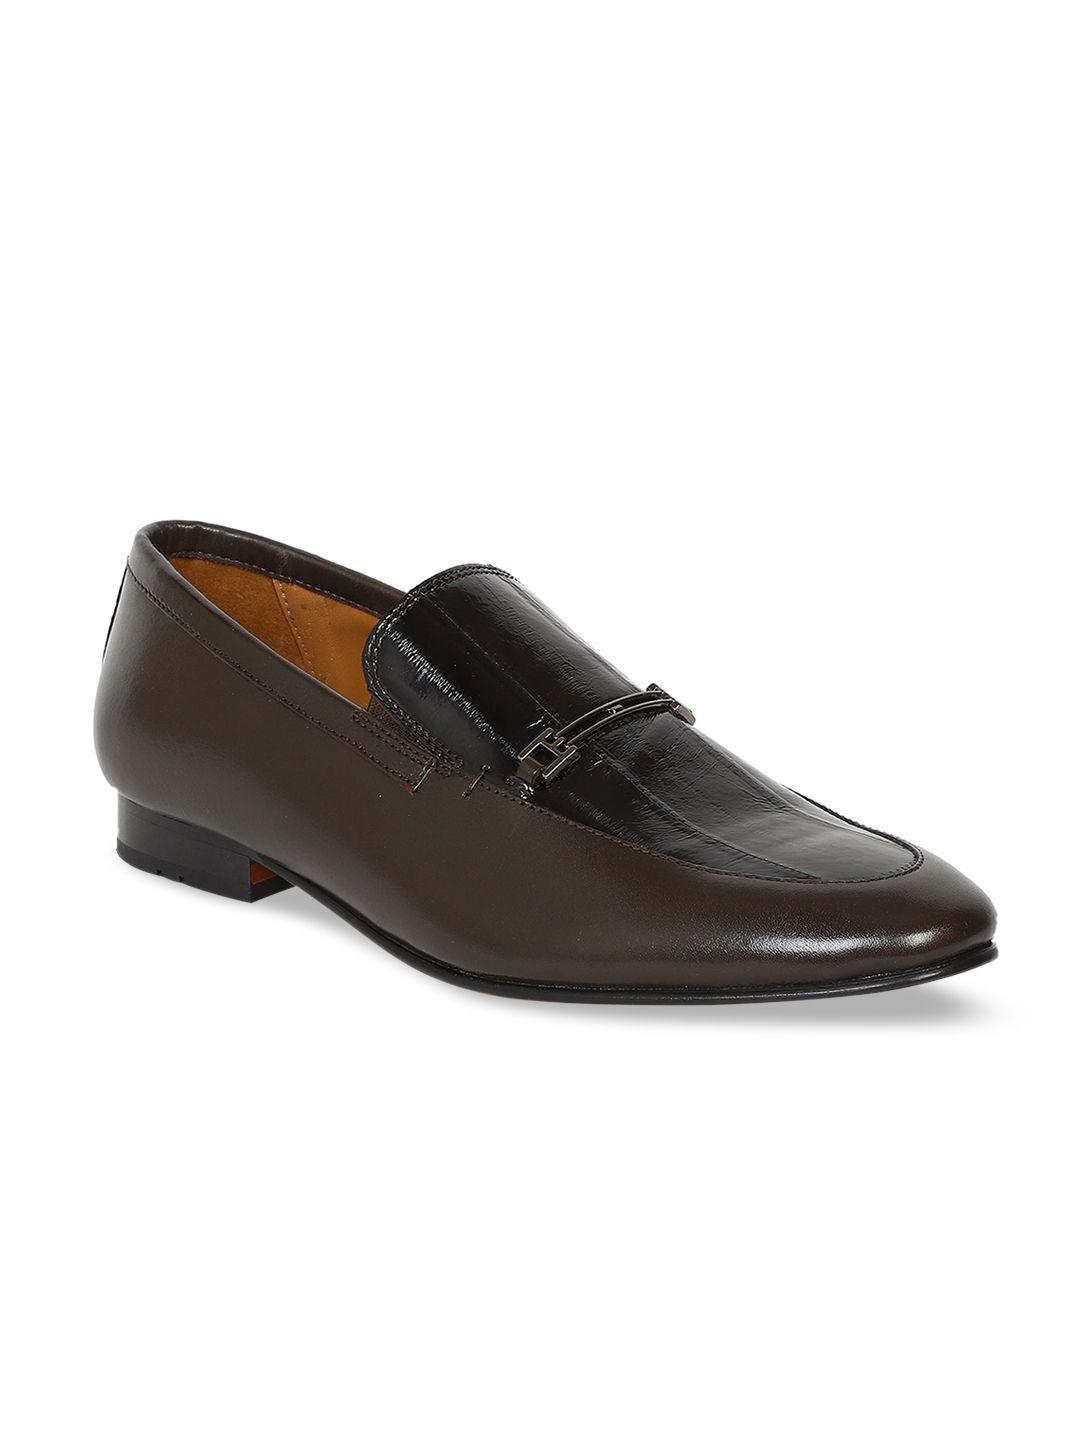 ruosh-men-brown-colourblocked-leather-loafers